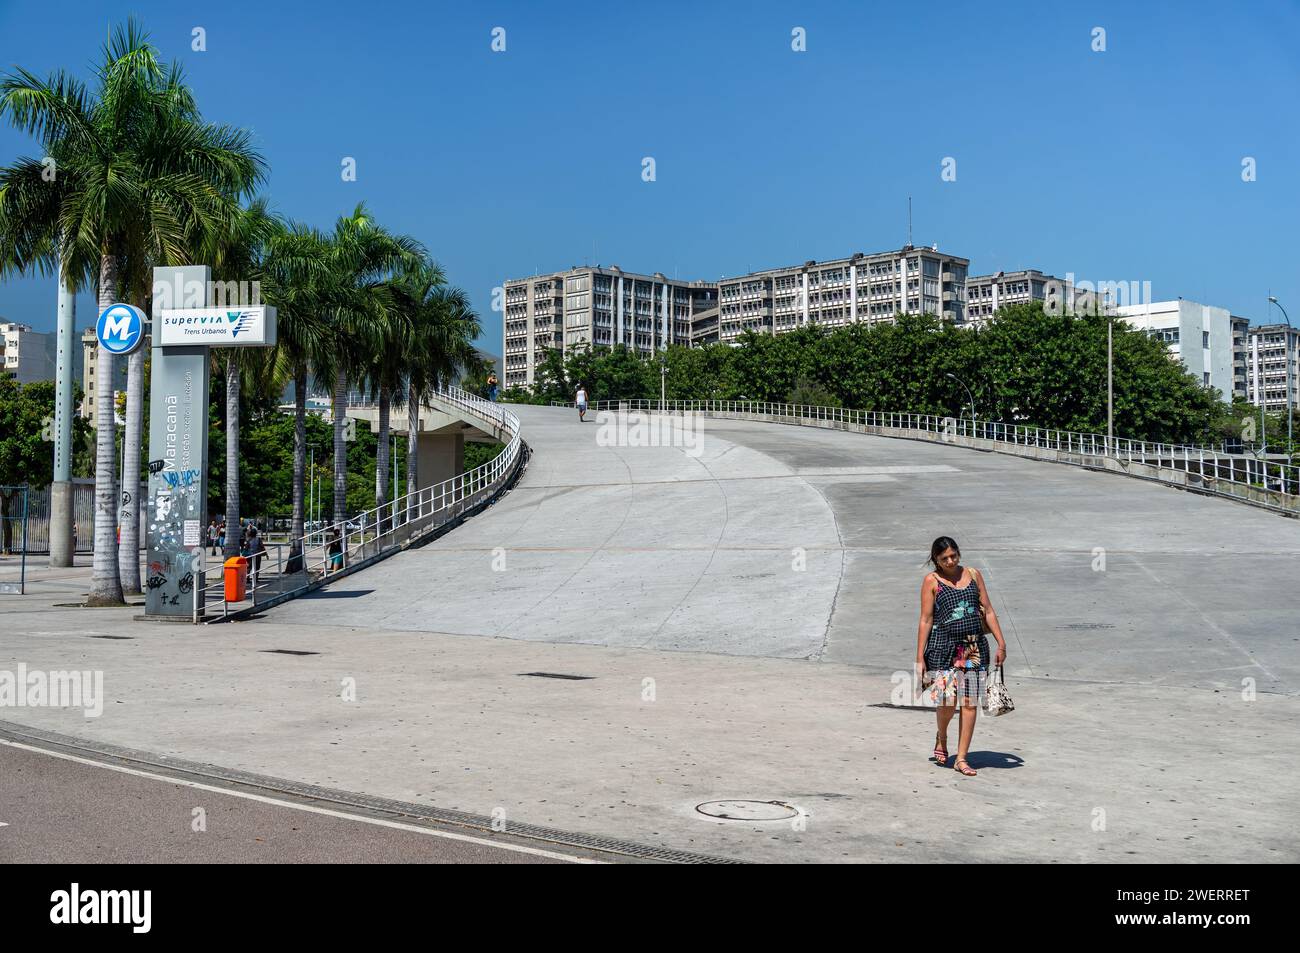 A wide footbridge ramp that links Maracana stadium to the train station of same name with partial view of Rio de Janeiro State University at the back. Stock Photo